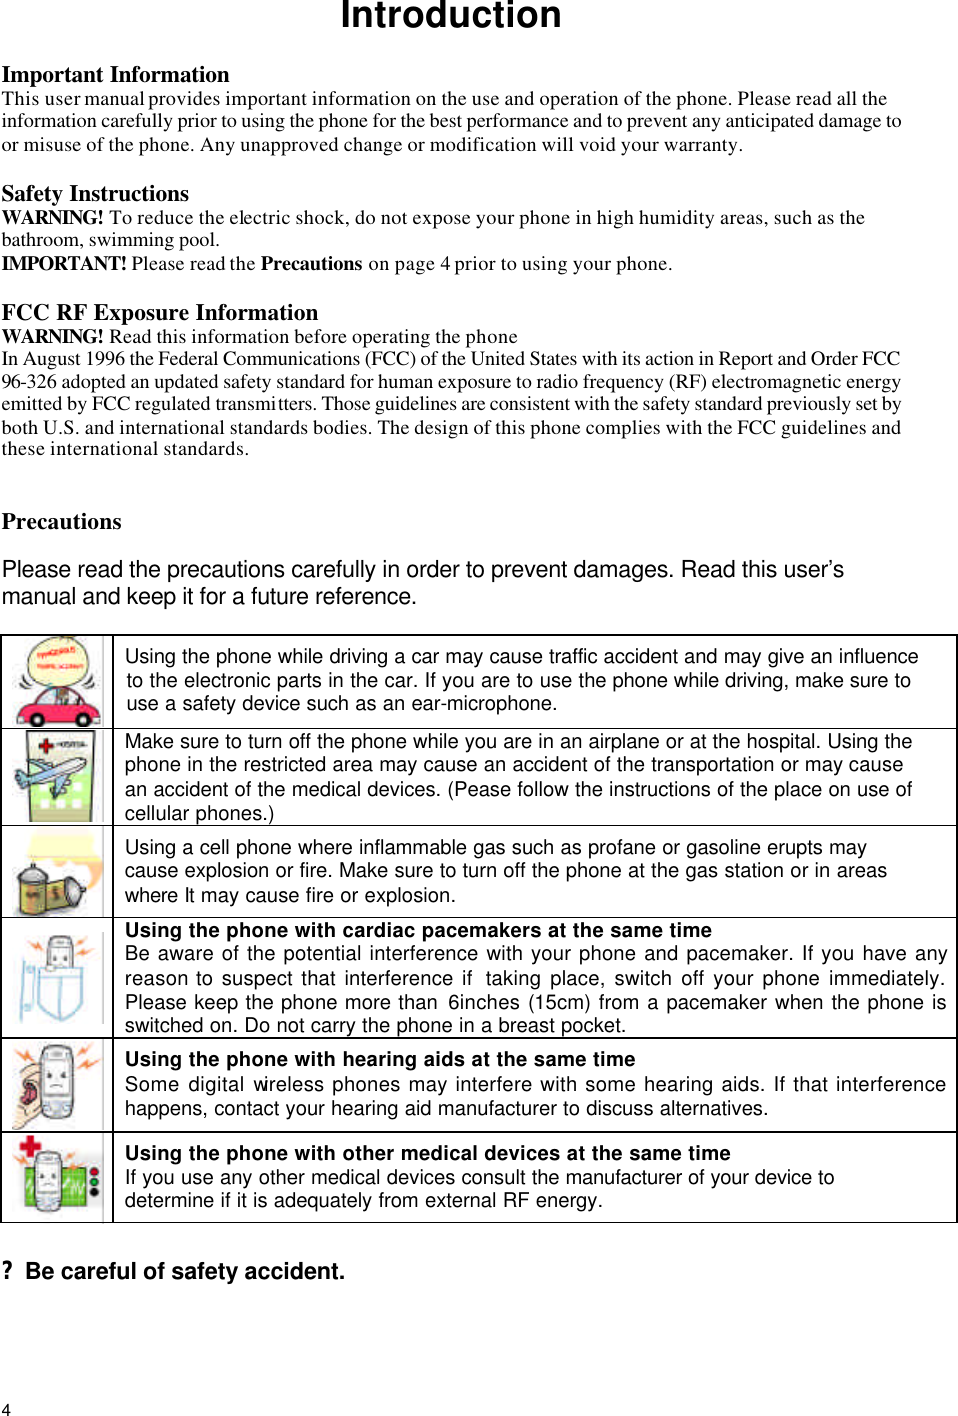  4Introduction  Important Information This user manual provides important information on the use and operation of the phone. Please read all the information carefully prior to using the phone for the best performance and to prevent any anticipated damage to or misuse of the phone. Any unapproved change or modification will void your warranty.  Safety Instructions WARNING! To reduce the electric shock, do not expose your phone in high humidity areas, such as the bathroom, swimming pool. IMPORTANT! Please read the Precautions on page 4 prior to using your phone.  FCC RF Exposure Information WARNING! Read this information before operating the phone In August 1996 the Federal Communications (FCC) of the United States with its action in Report and Order FCC 96-326 adopted an updated safety standard for human exposure to radio frequency (RF) electromagnetic energy emitted by FCC regulated transmitters. Those guidelines are consistent with the safety standard previously set by both U.S. and international standards bodies. The design of this phone complies with the FCC guidelines and these international standards.   Precautions   Please read the precautions carefully in order to prevent damages. Read this user’s manual and keep it for a future reference.    Using the phone while driving a car may cause traffic accident and may give an influence to the electronic parts in the car. If you are to use the phone while driving, make sure to use a safety device such as an ear-microphone.   Make sure to turn off the phone while you are in an airplane or at the hospital. Using the phone in the restricted area may cause an accident of the transportation or may cause an accident of the medical devices. (Pease follow the instructions of the place on use of cellular phones.)  Using a cell phone where inflammable gas such as profane or gasoline erupts may cause explosion or fire. Make sure to turn off the phone at the gas station or in areas where It may cause fire or explosion.   Using the phone with cardiac pacemakers at the same time Be aware of the potential interference with your phone and pacemaker. If you have any reason to suspect that interference if  taking place, switch off your phone immediately. Please keep the phone more than 6inches (15cm) from a pacemaker when the phone is switched on. Do not carry the phone in a breast pocket.   Using the phone with hearing aids at the same time Some digital wireless phones may interfere with some hearing aids. If that interference happens, contact your hearing aid manufacturer to discuss alternatives.   Using the phone with other medical devices at the same time If you use any other medical devices consult the manufacturer of your device to determine if it is adequately from external RF energy.   ? Be careful of safety accident.  